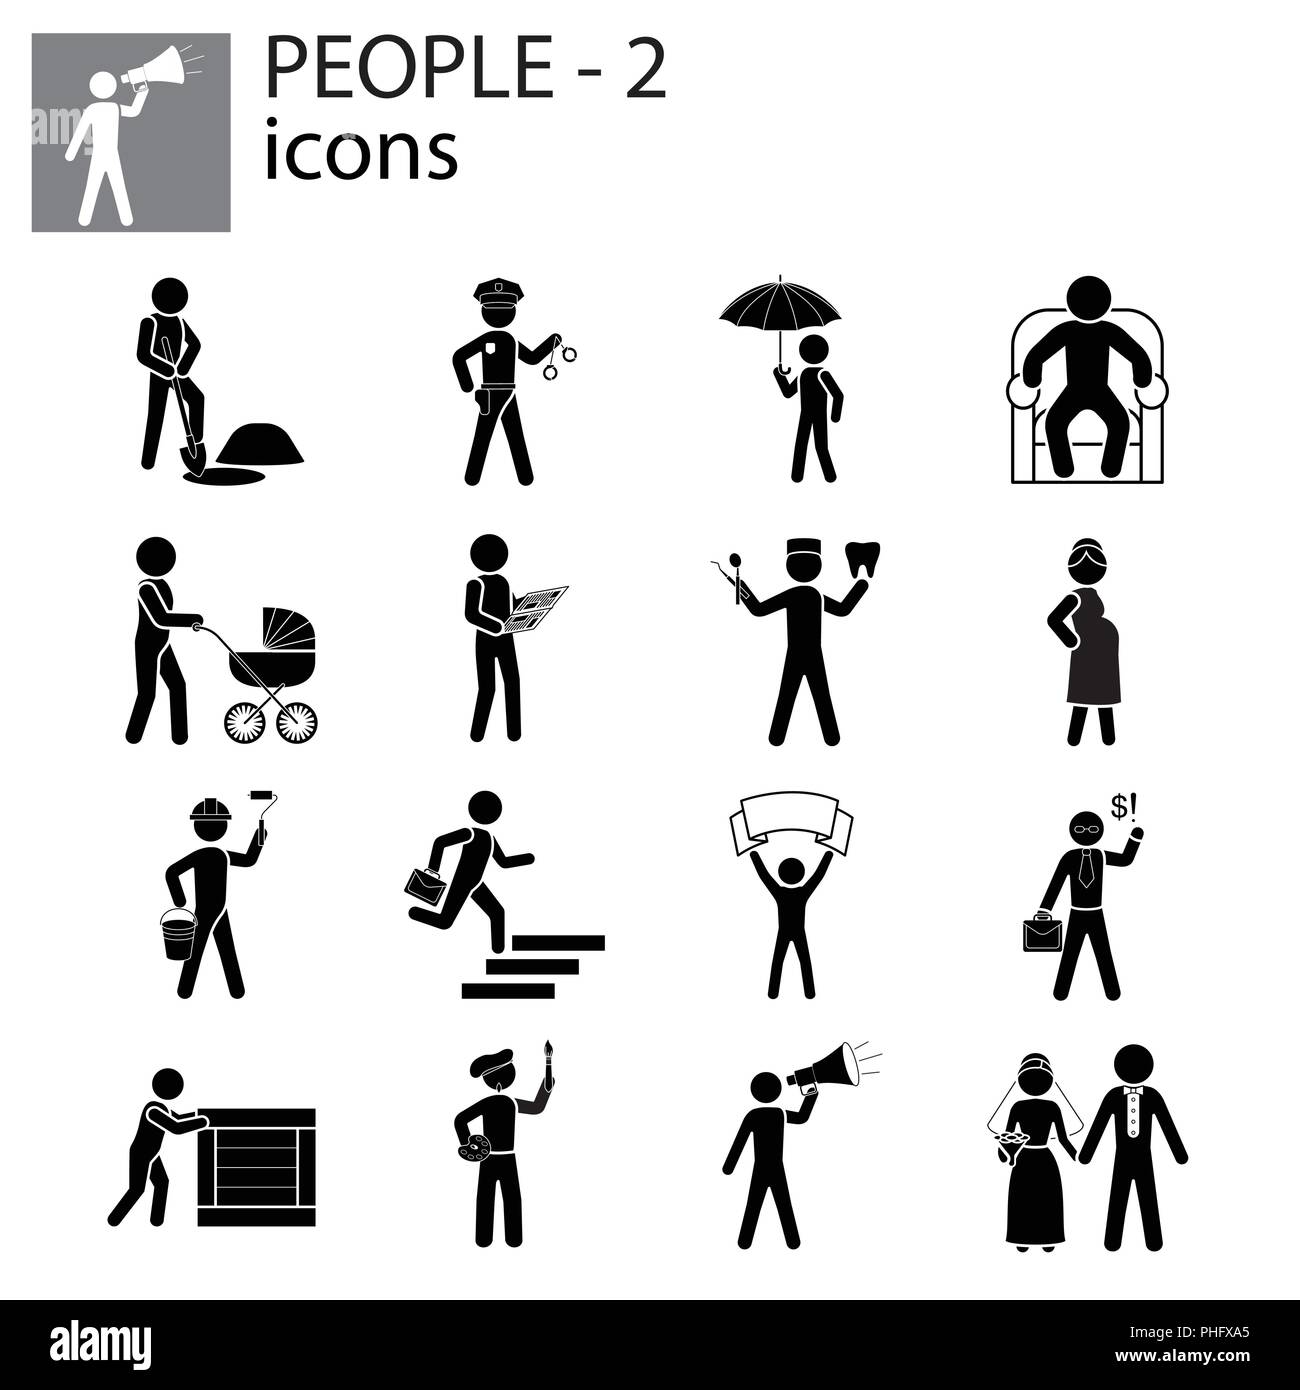 People icons set (professions, actions, gestures) black on white background Stock Vector